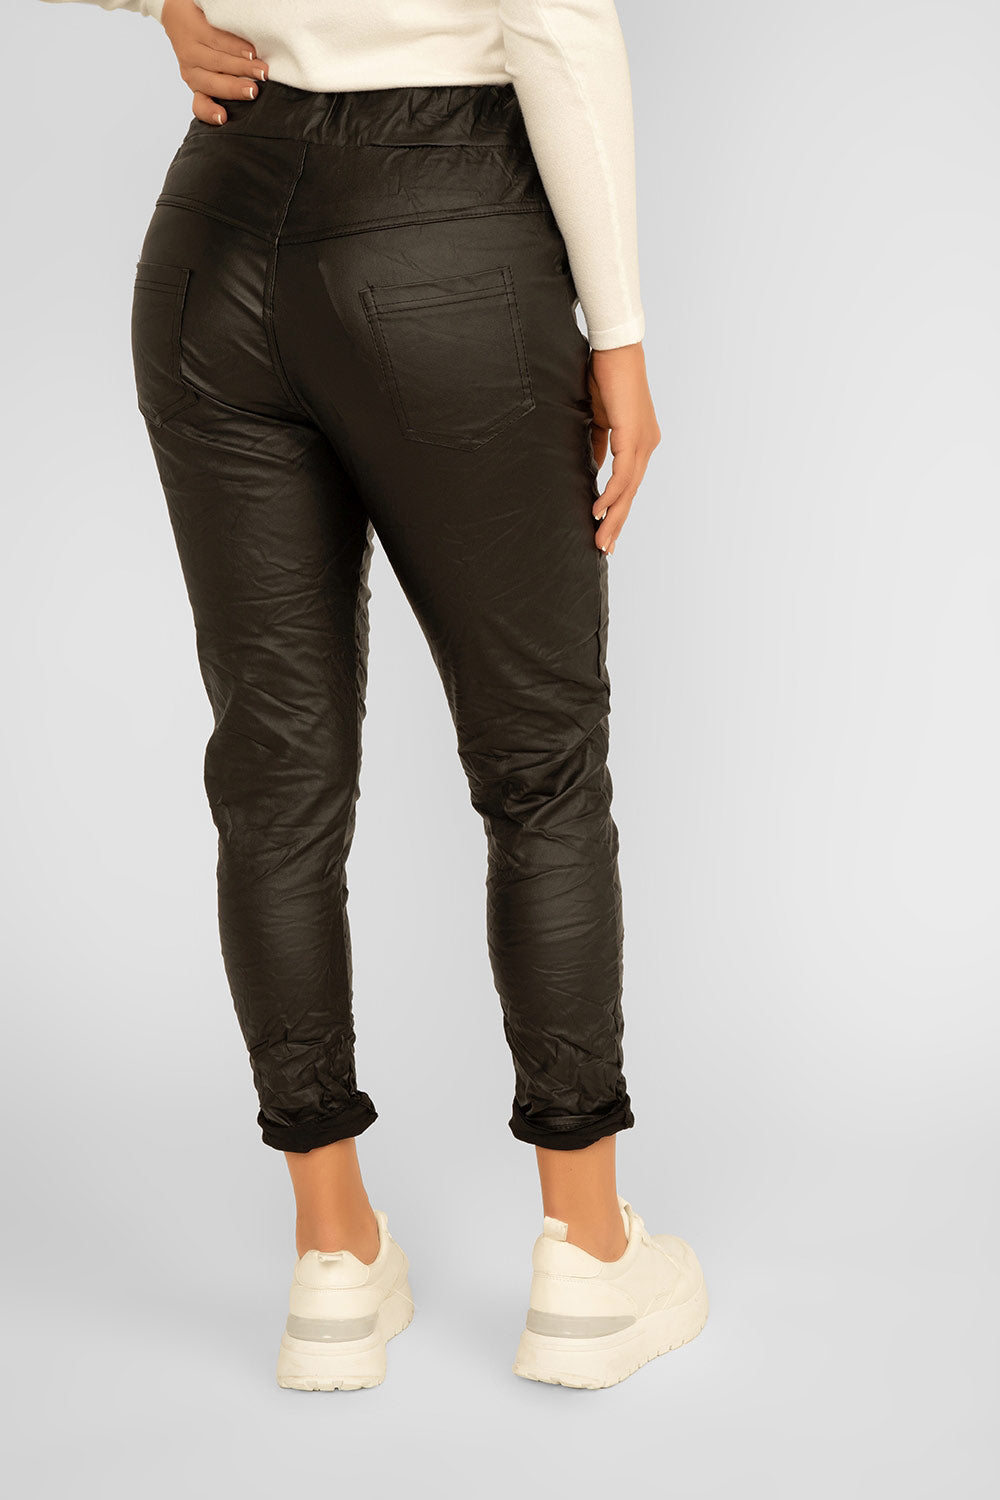 Women's Clothing ELISSIA (NF10930-2) Coated Pull-On Crinkled Pants in BLACK